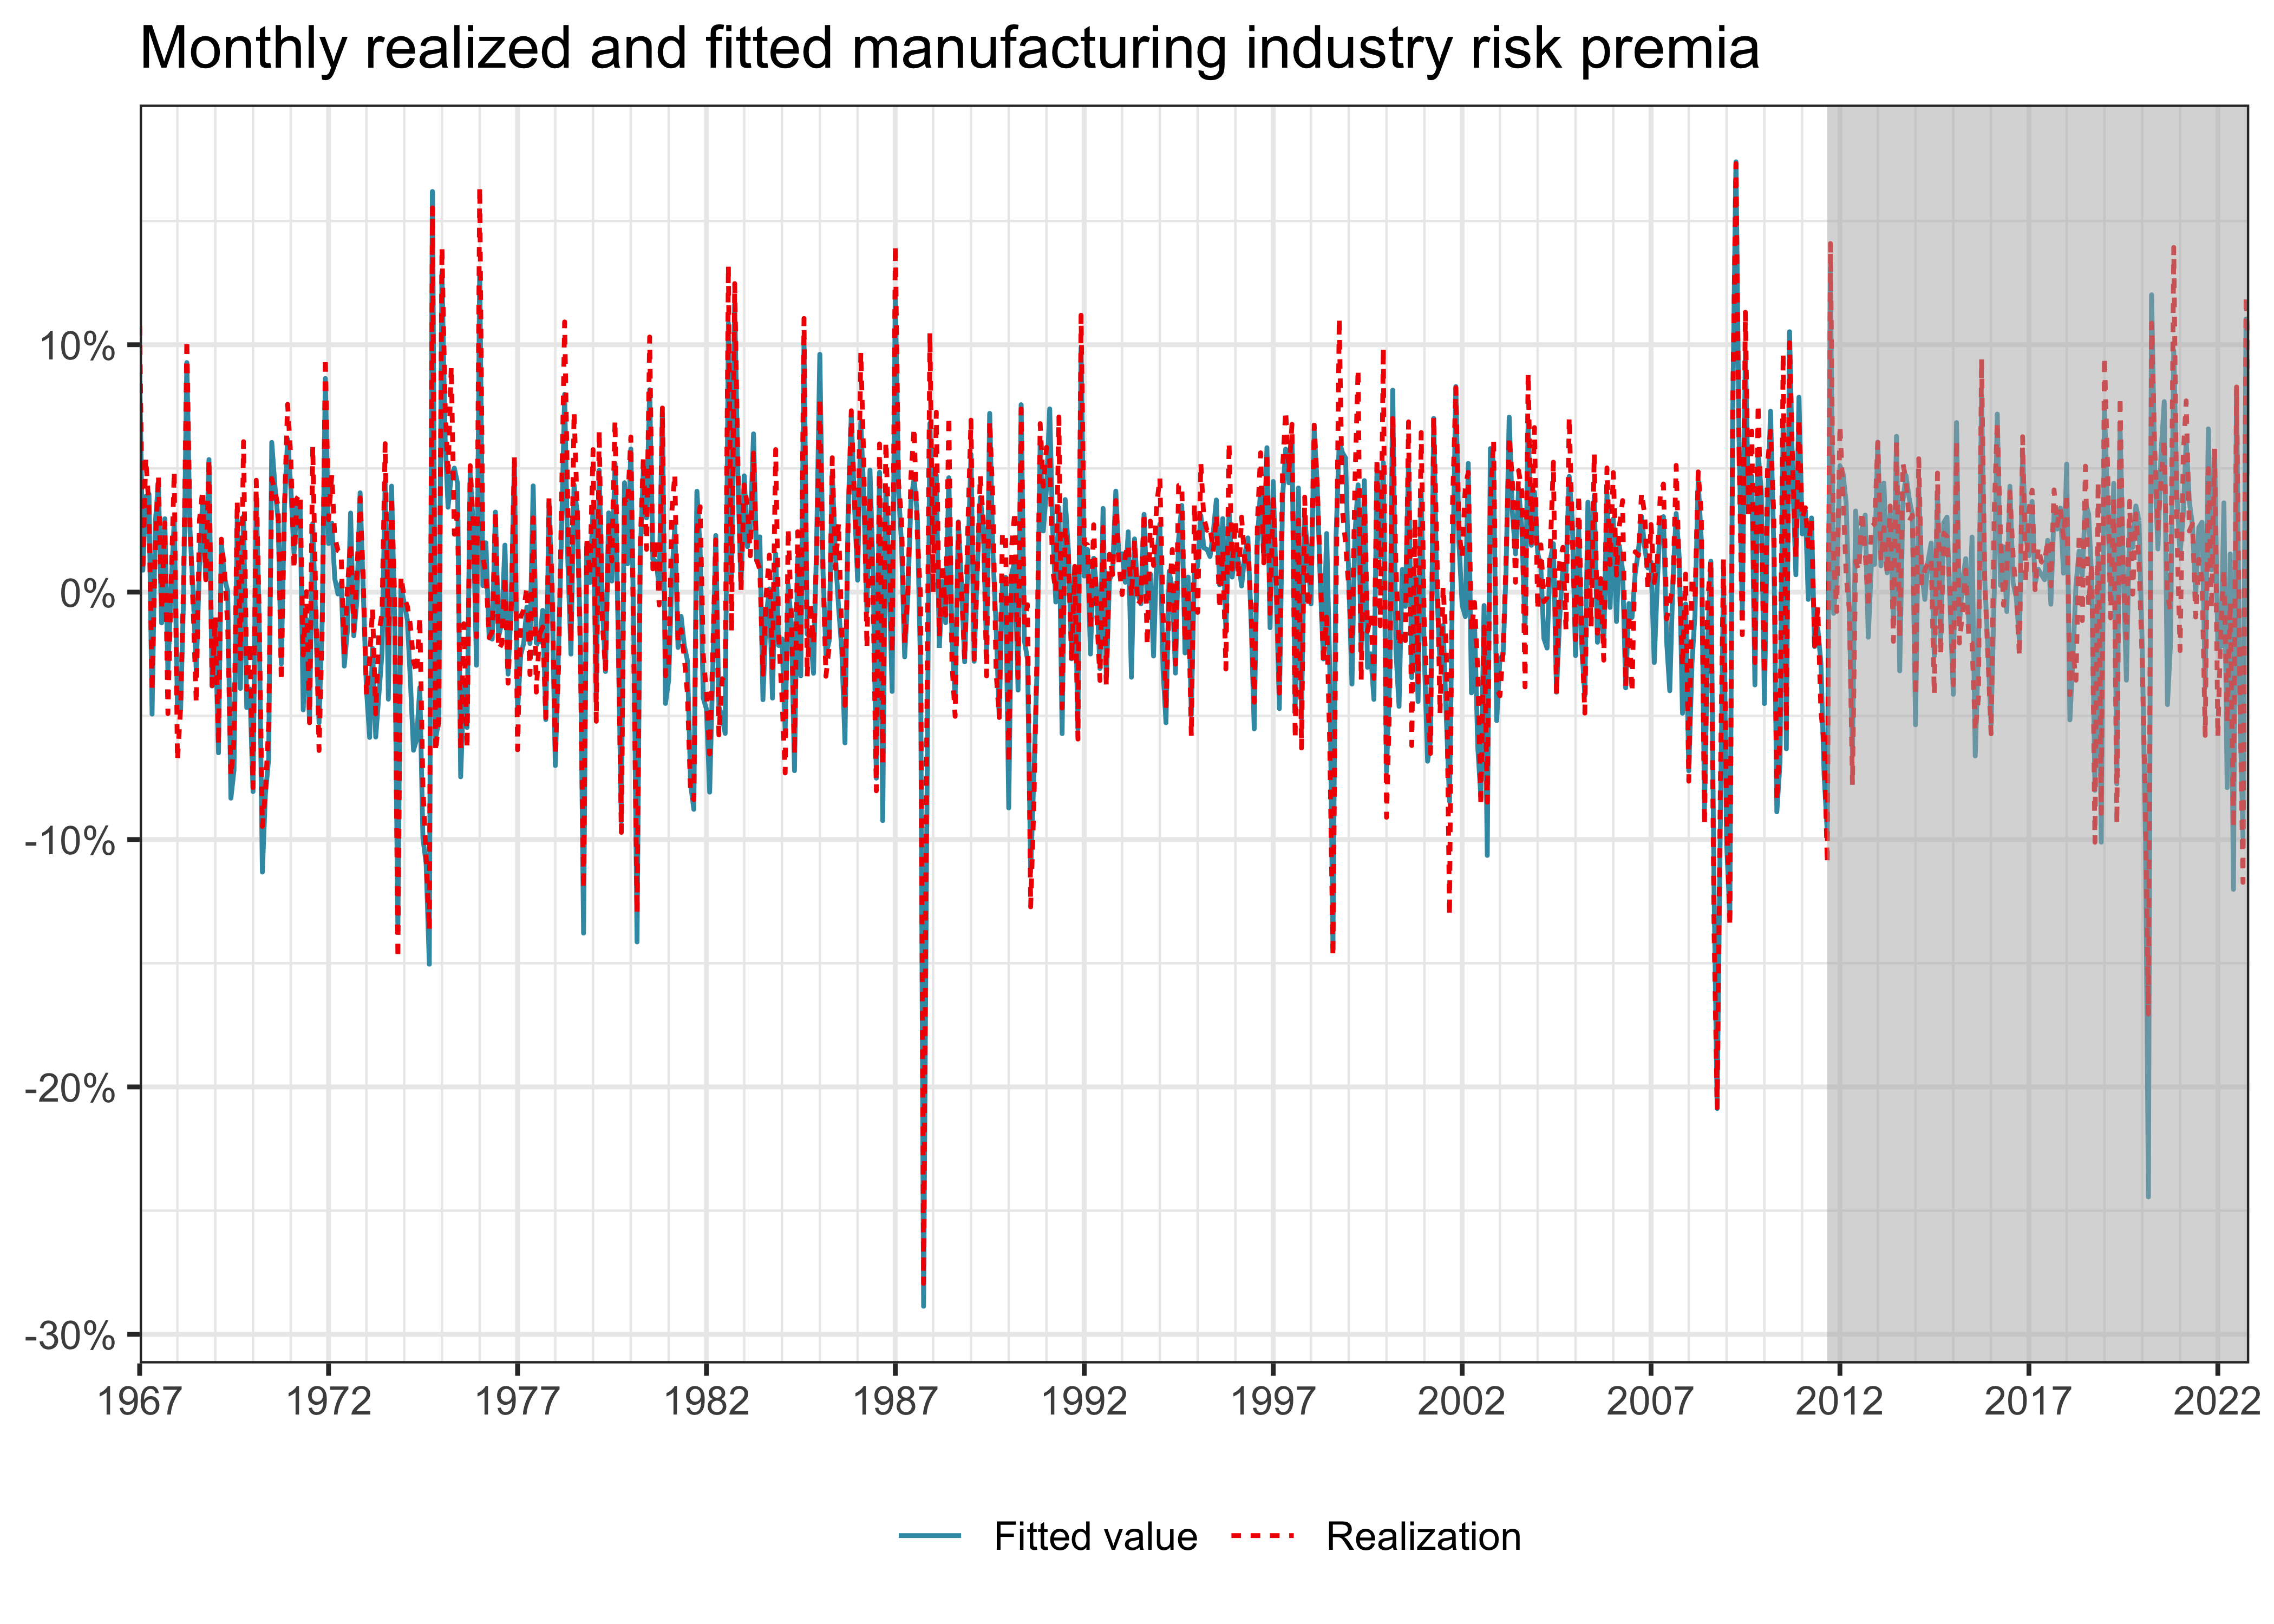 Title: Monthly realized and fitted manufacturing industry risk premium. The figure shows the time series of realized and predicted manufacturing industry risk premiums. The figure seems to indicate that the predictions capture most of the return dynamics.